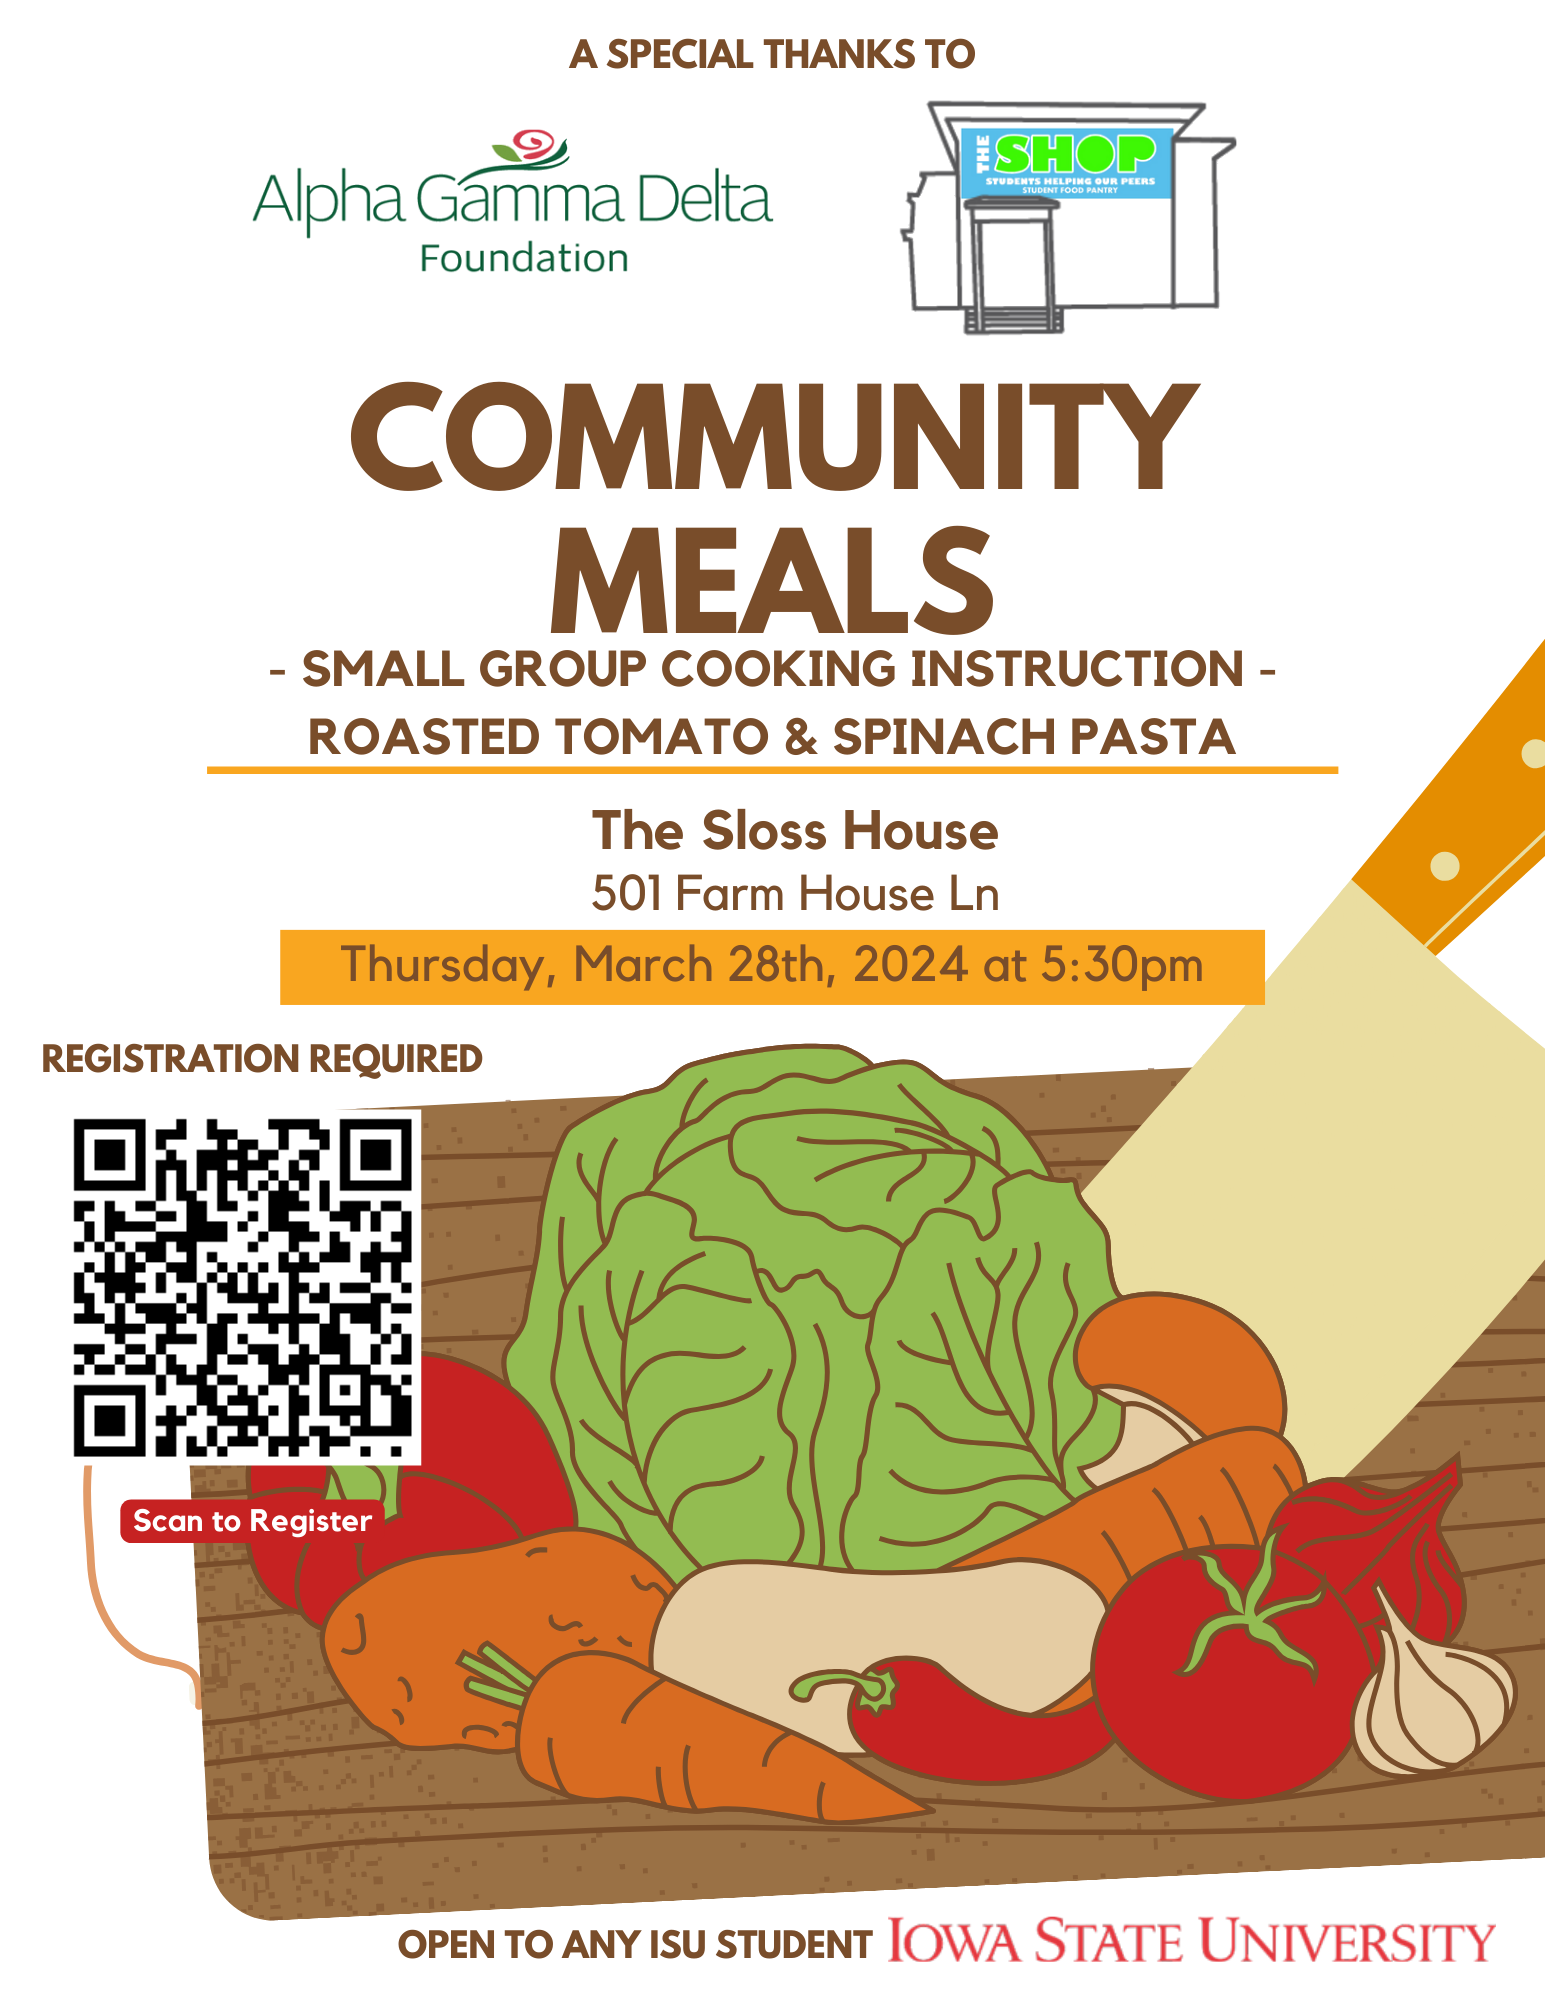 Flyer with vegetables on it.  Community meal at Sloss House on Thursday, March 28th at 5:30.  Small Group Cooking Instruction. Roasted tomato and spinach pasta